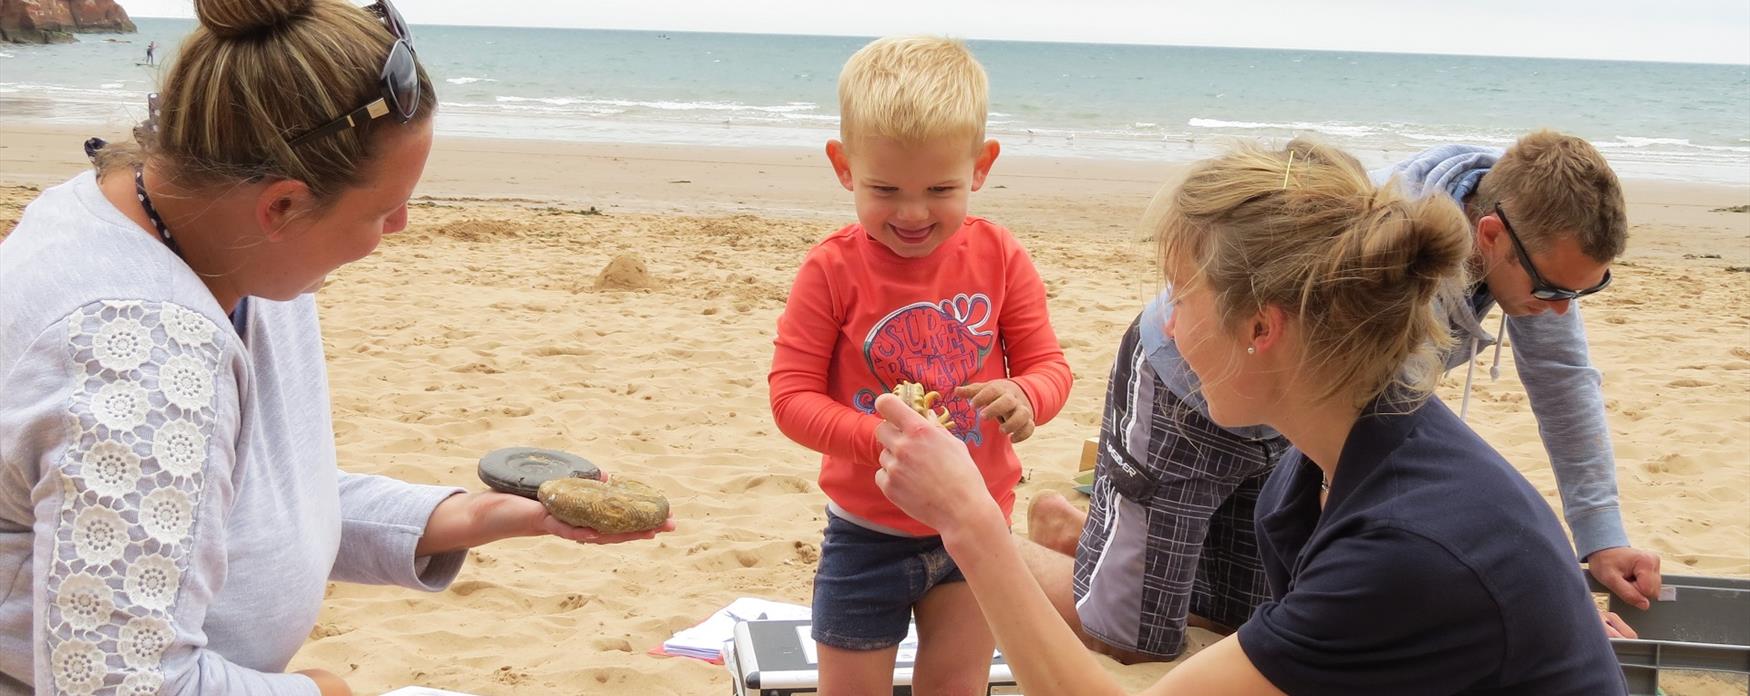 Jurassic Coast Ambassador Emily Cowper-Coles with a young fossil fan at Sandy Bay.